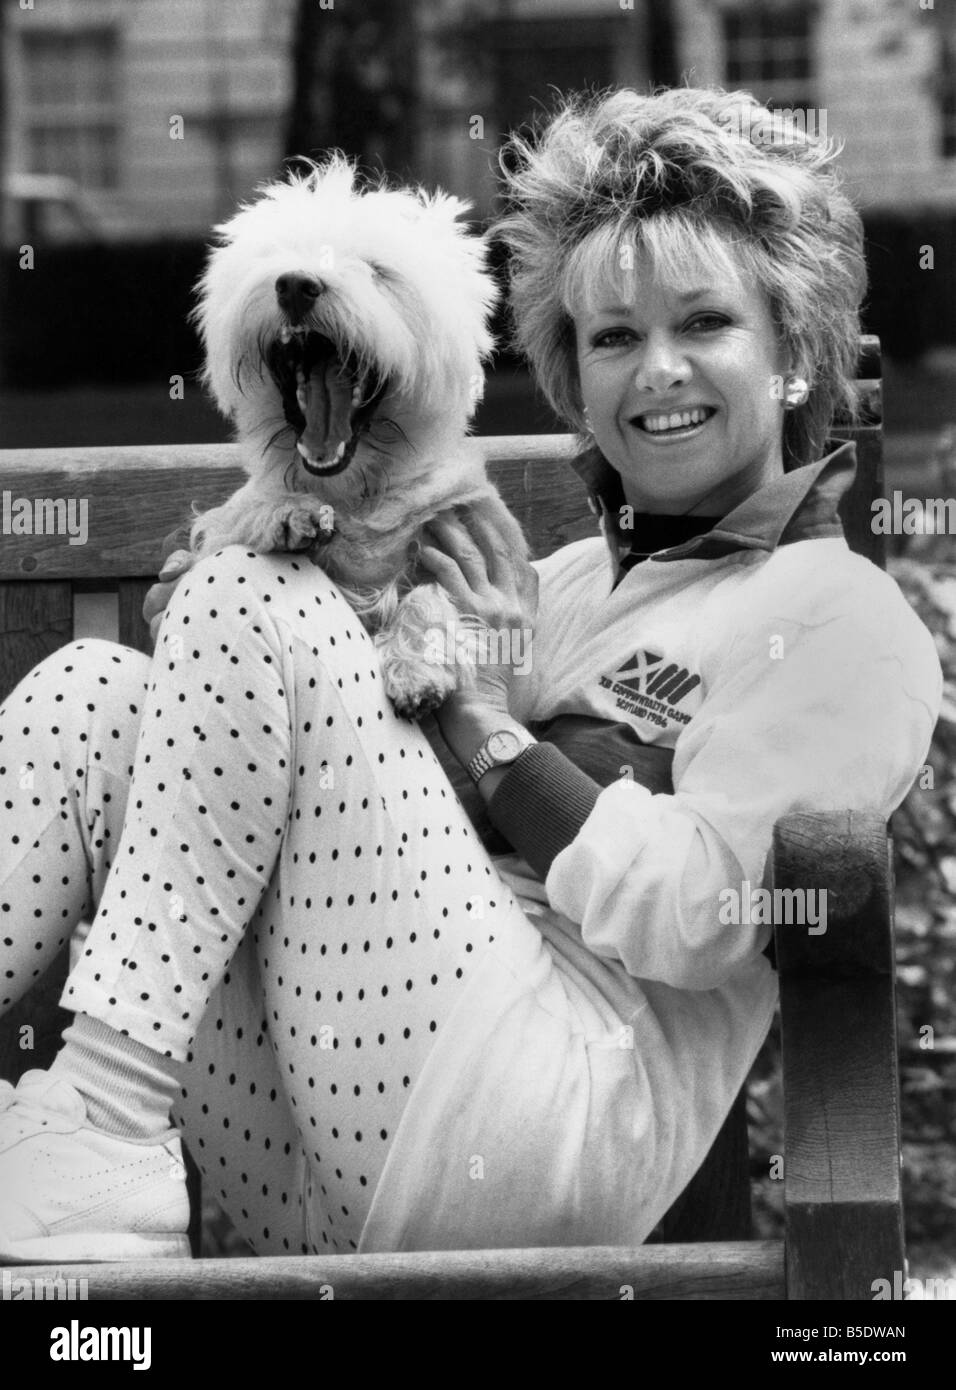 Elaine Paige: Singing star Elaine Page tunes up for the Commonwealth Games with a little help from her terrier Tugger. Elaine sportingly donned a track suit top yesterday at a sporting booster in London before the games being in Edinburgh in July. Tugger went along to chew things over. Big Yawn.Elaine Page and Tugger. June 1986 P000682 Stock Photo